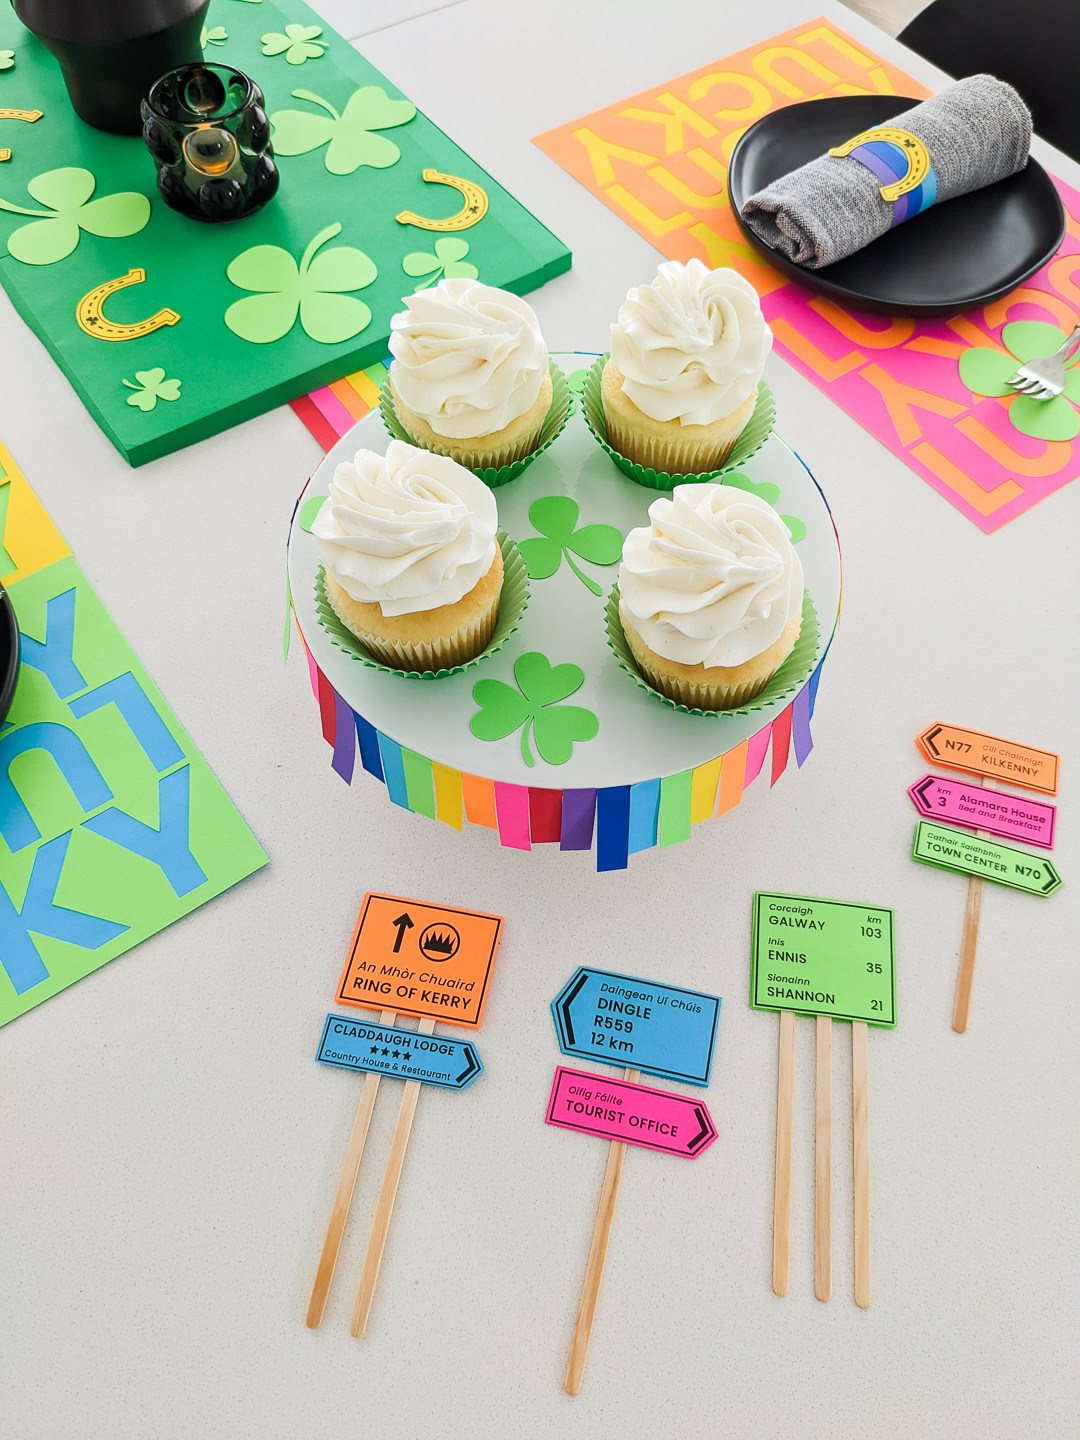 DIY Irish road signs cupcake toppers on a table next to cupcakes sitting on a rainbow cupcake stand with St. Patrick's table decor in the background